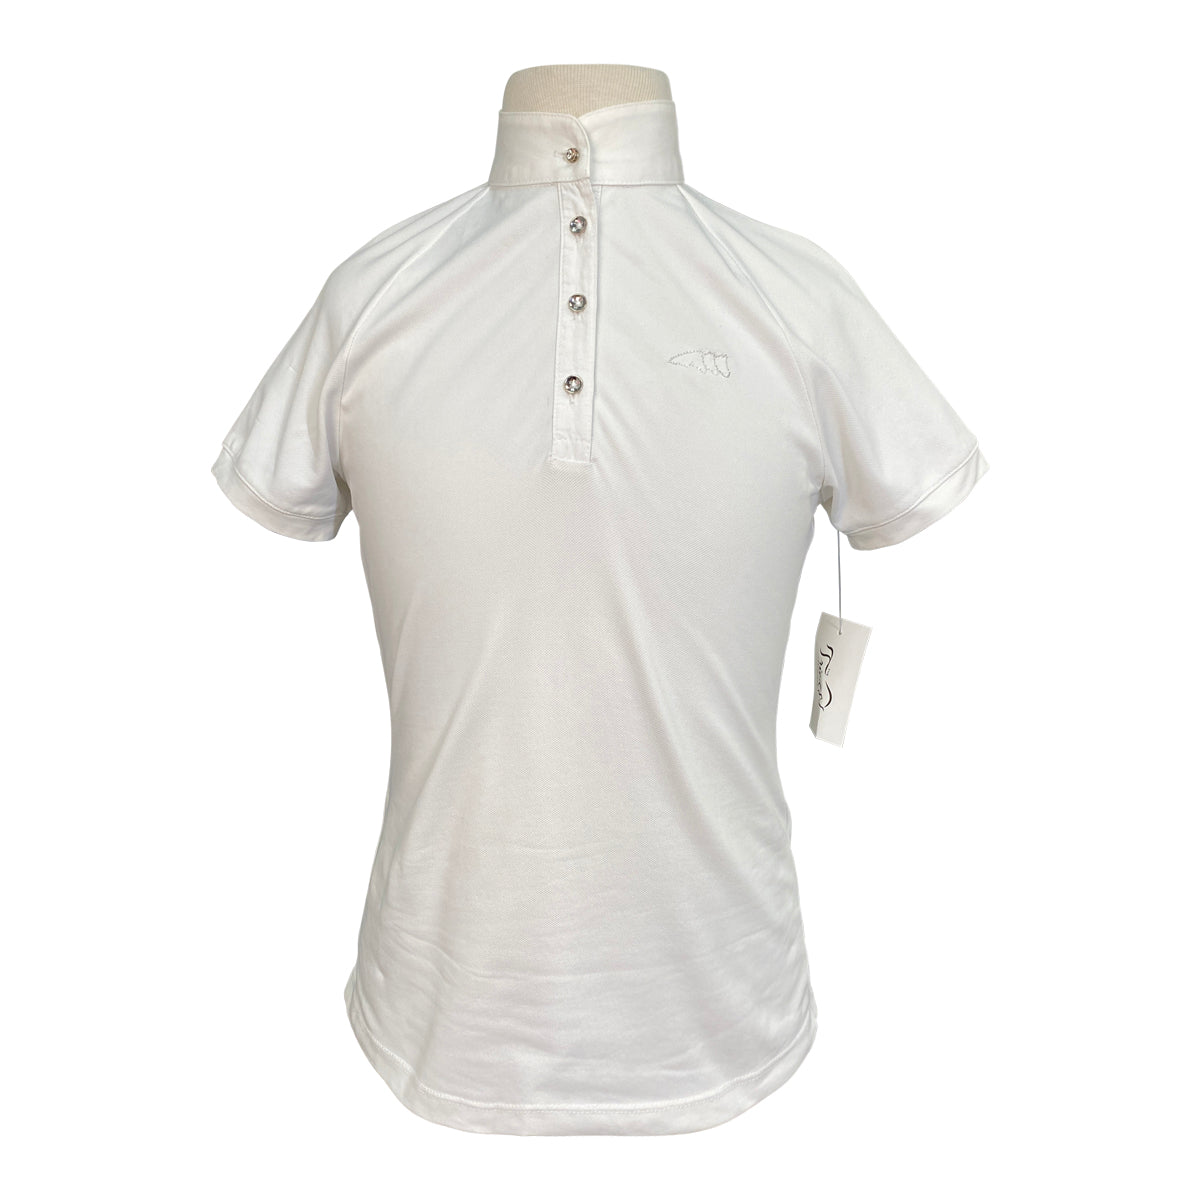 Equiline Kids Short Sleeve Show Shirt in White